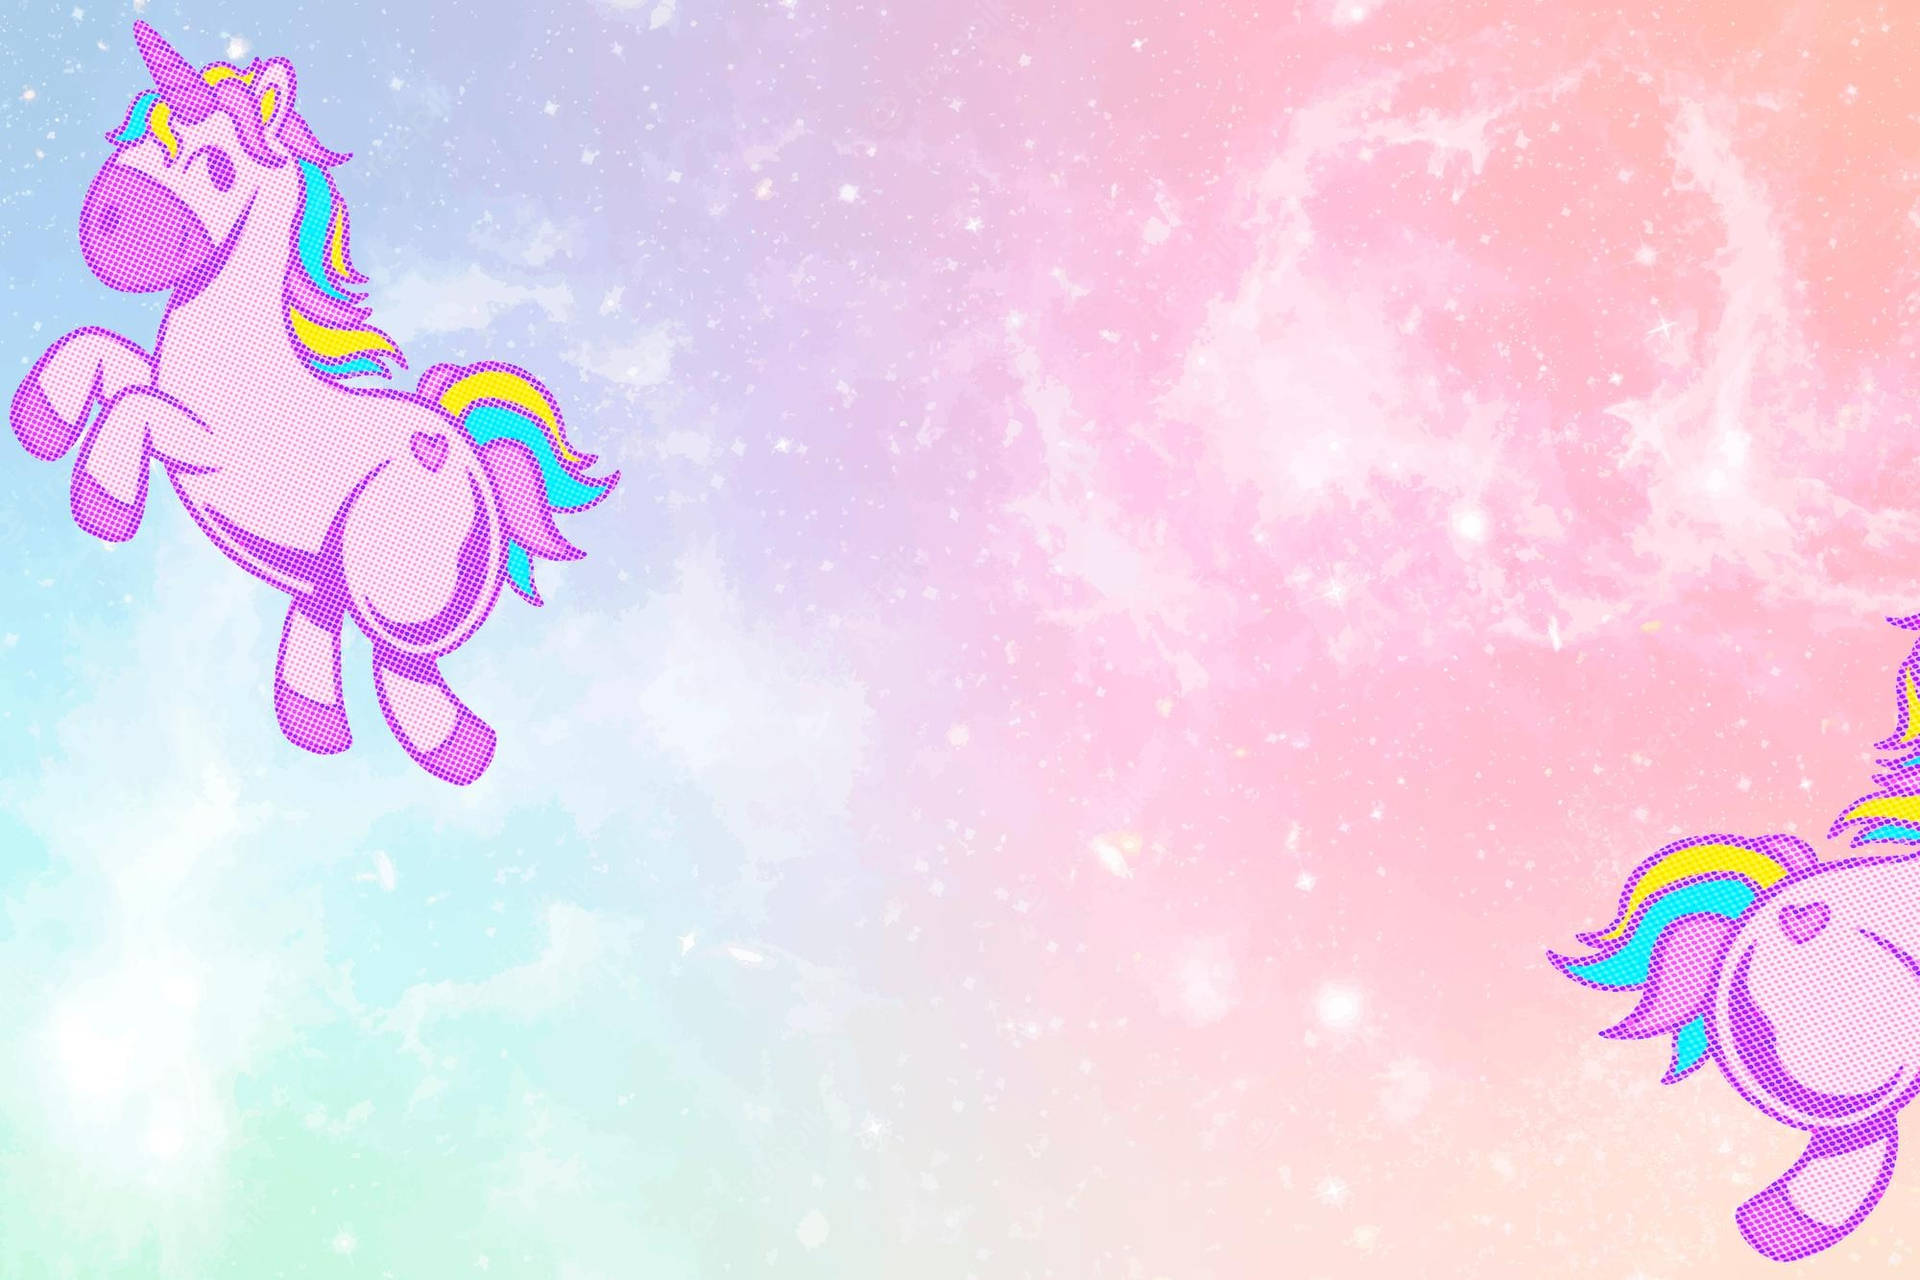 A Cool and Colorful Unicorn Wallpaper